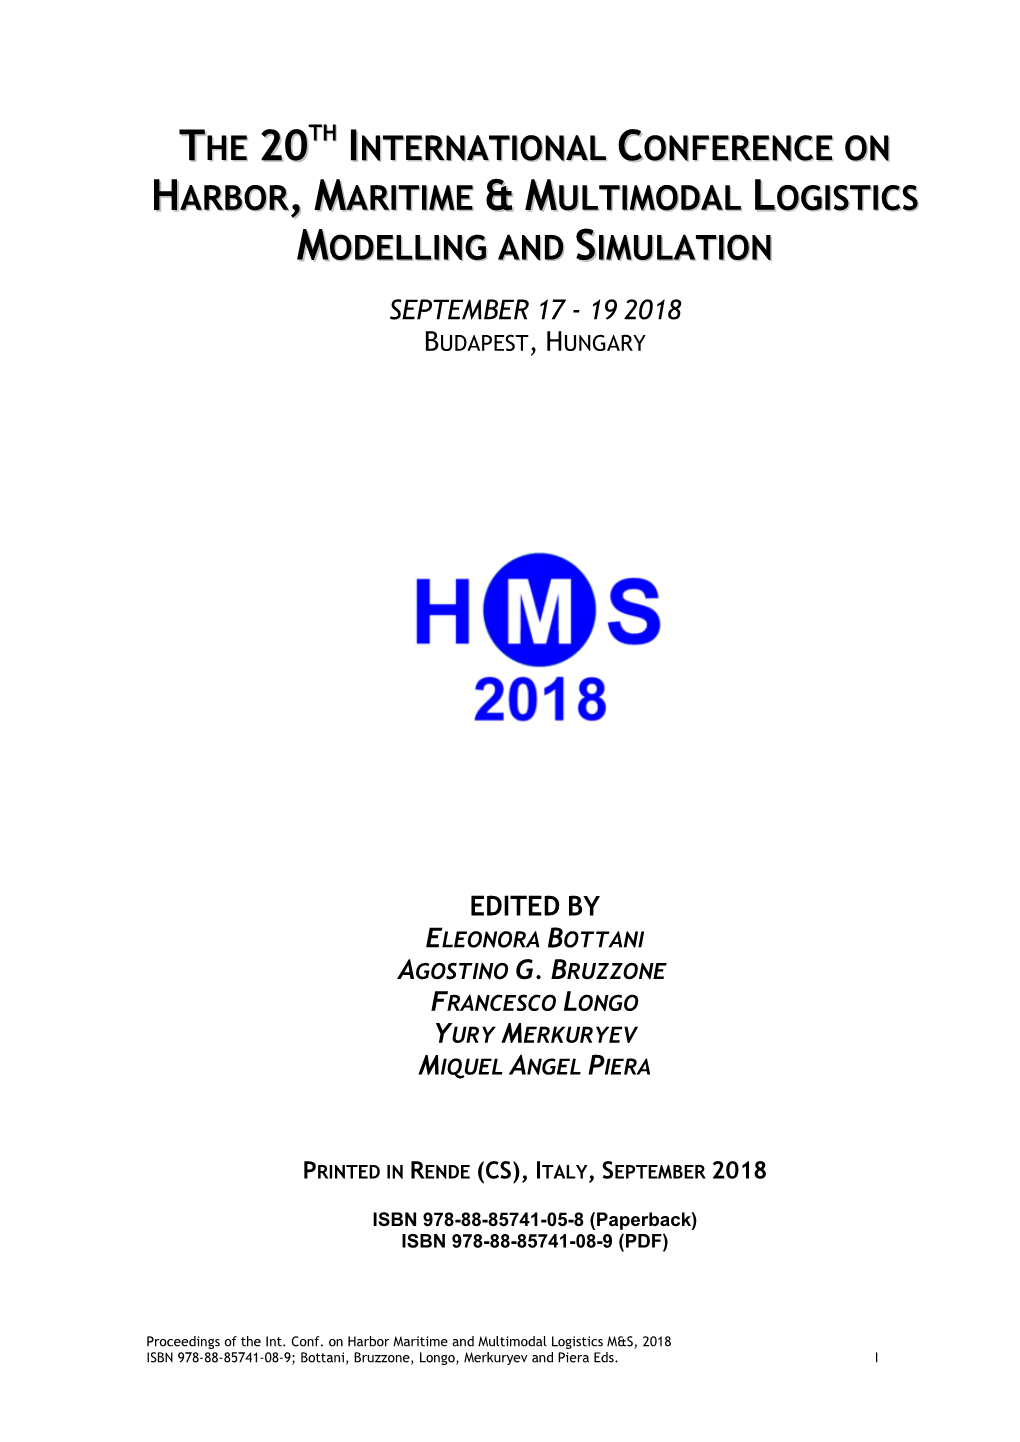 The 20Th International Conference on Harbor , Maritime & Multimodal Logistics Modelling and Simulation